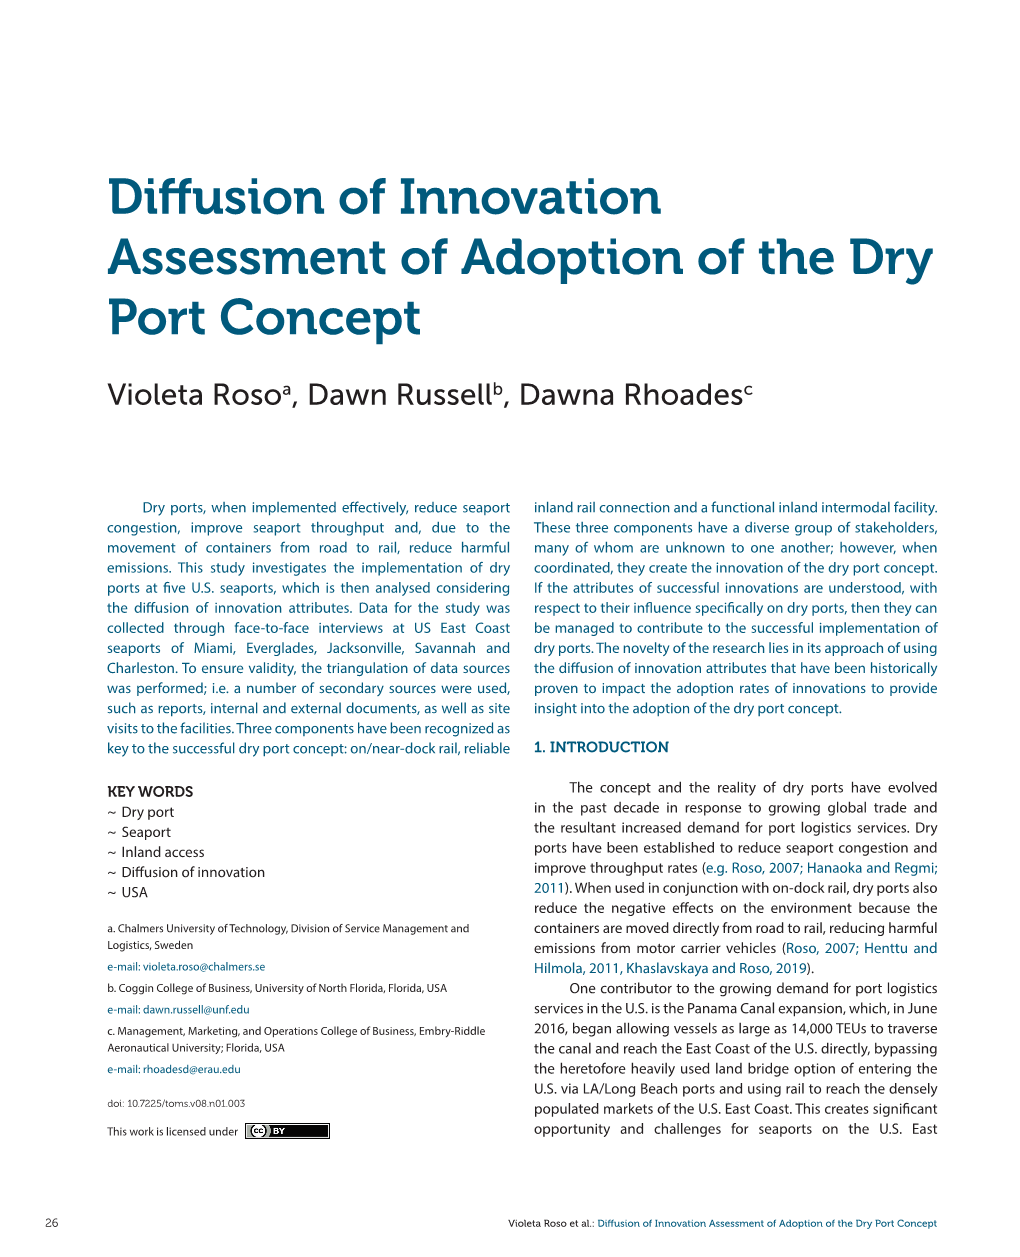 Diffusion of Innovation Assessment of Adoption of the Dry Port Concept